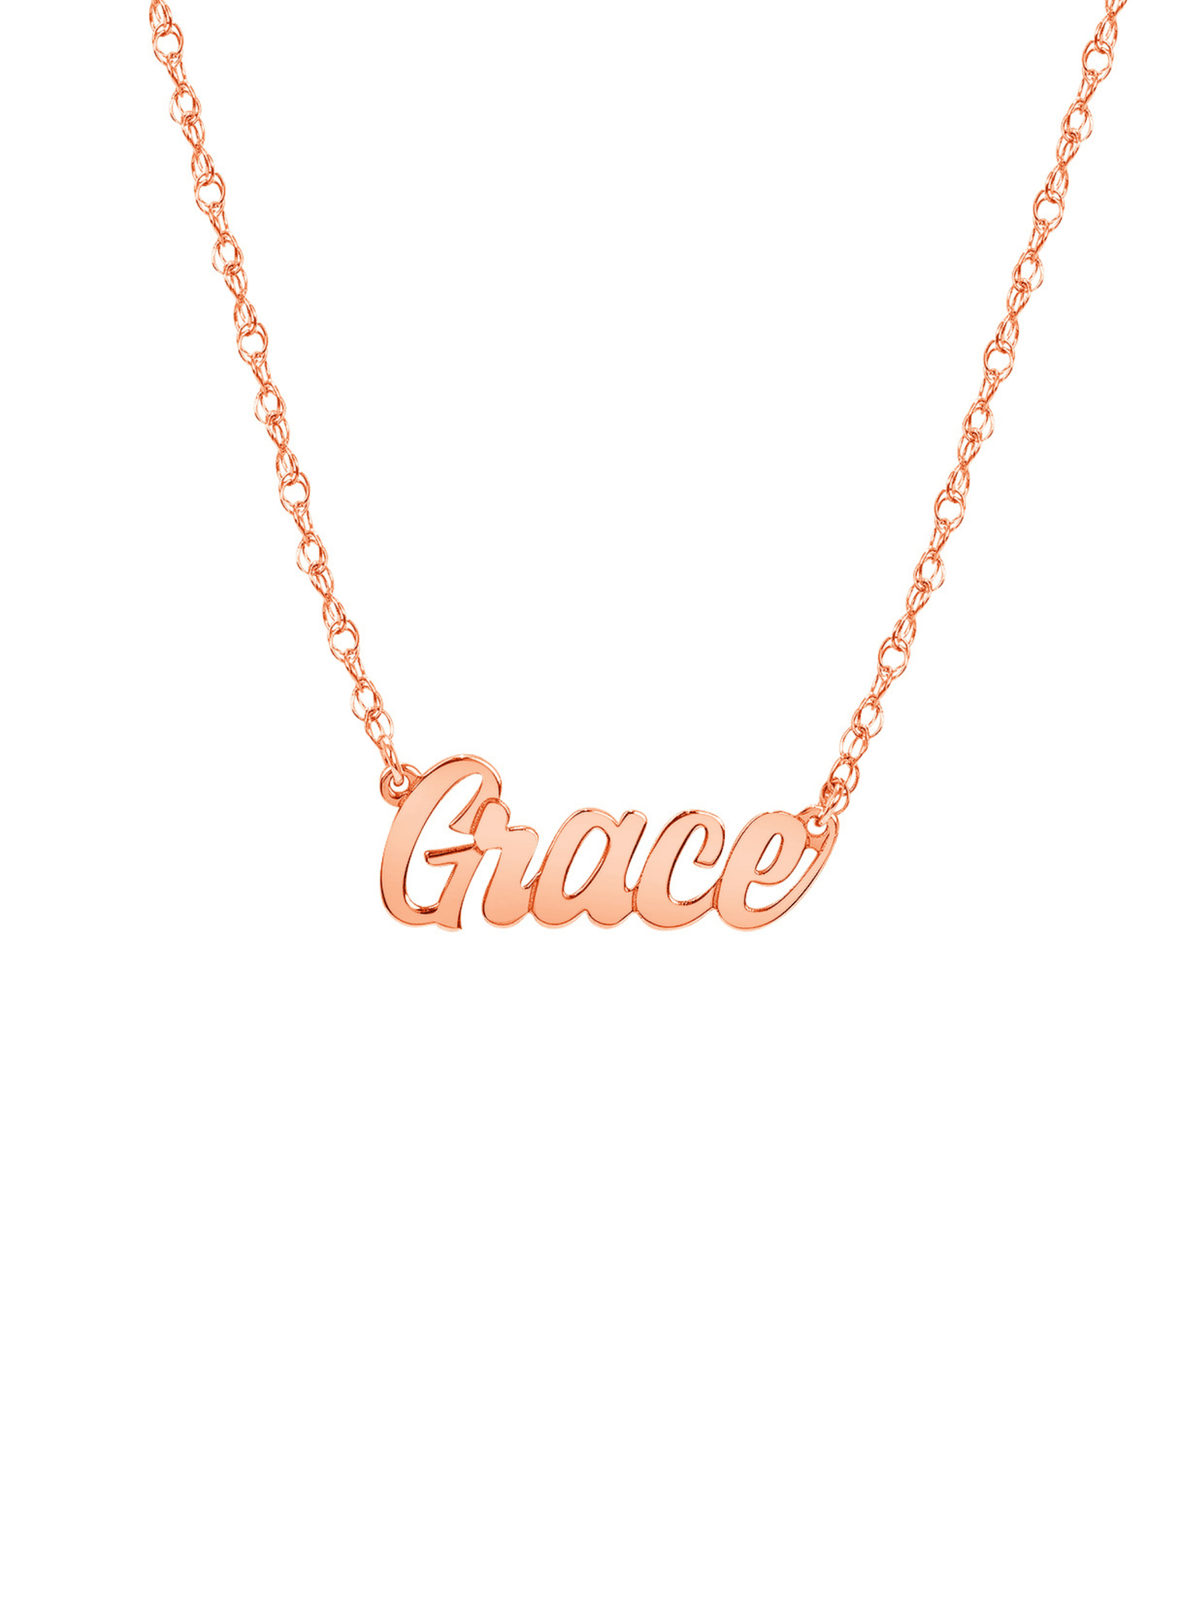 Rose gold script name necklace on white background